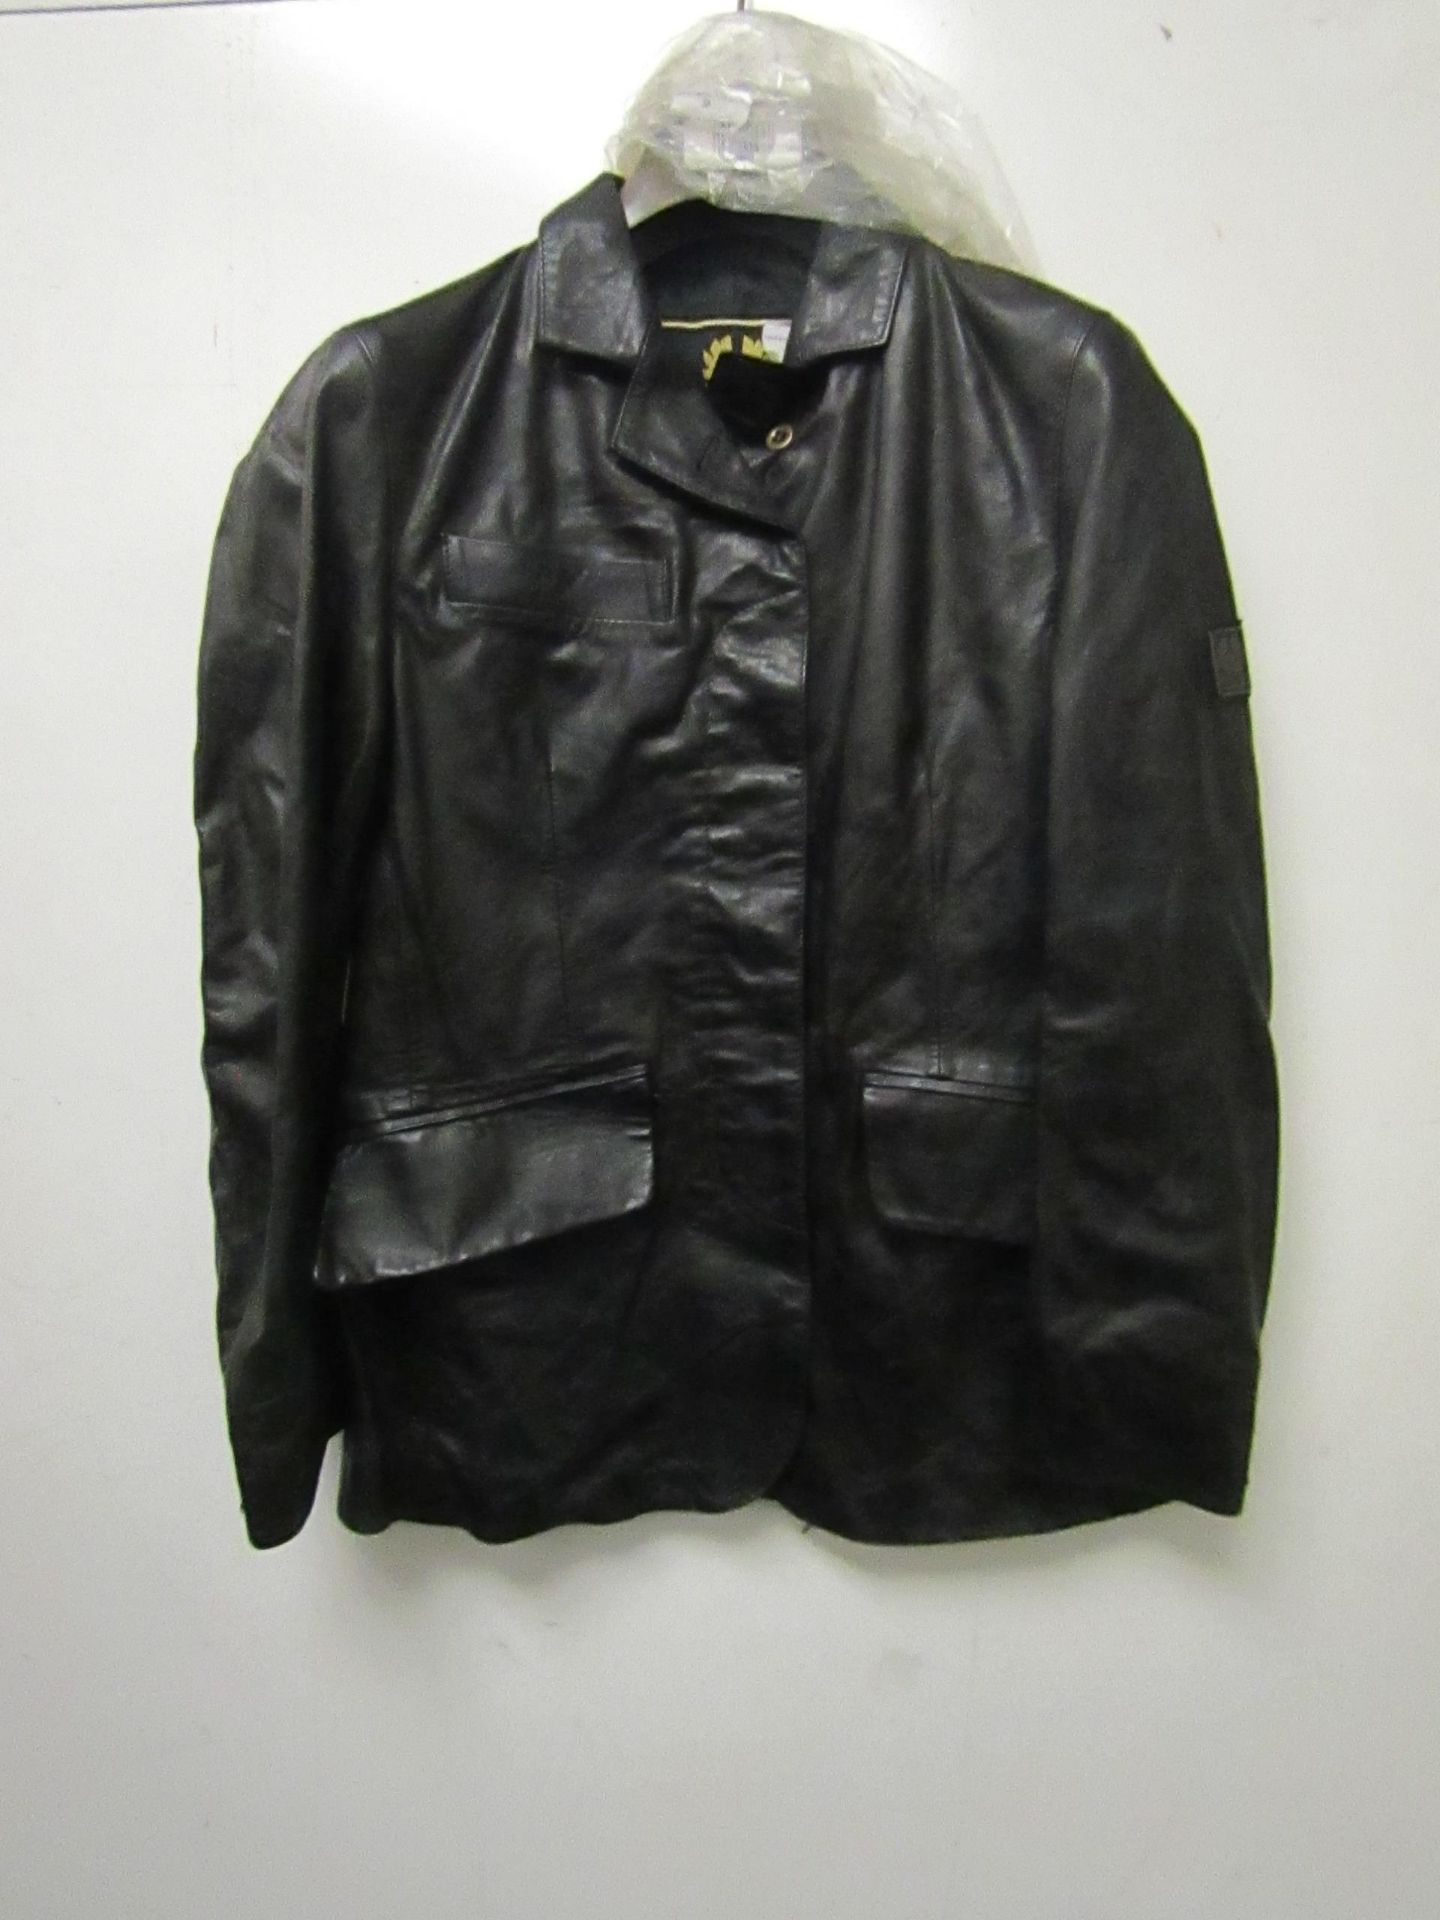 Ladies Belstaff Marten Black leather Jacket, new with tag size 40